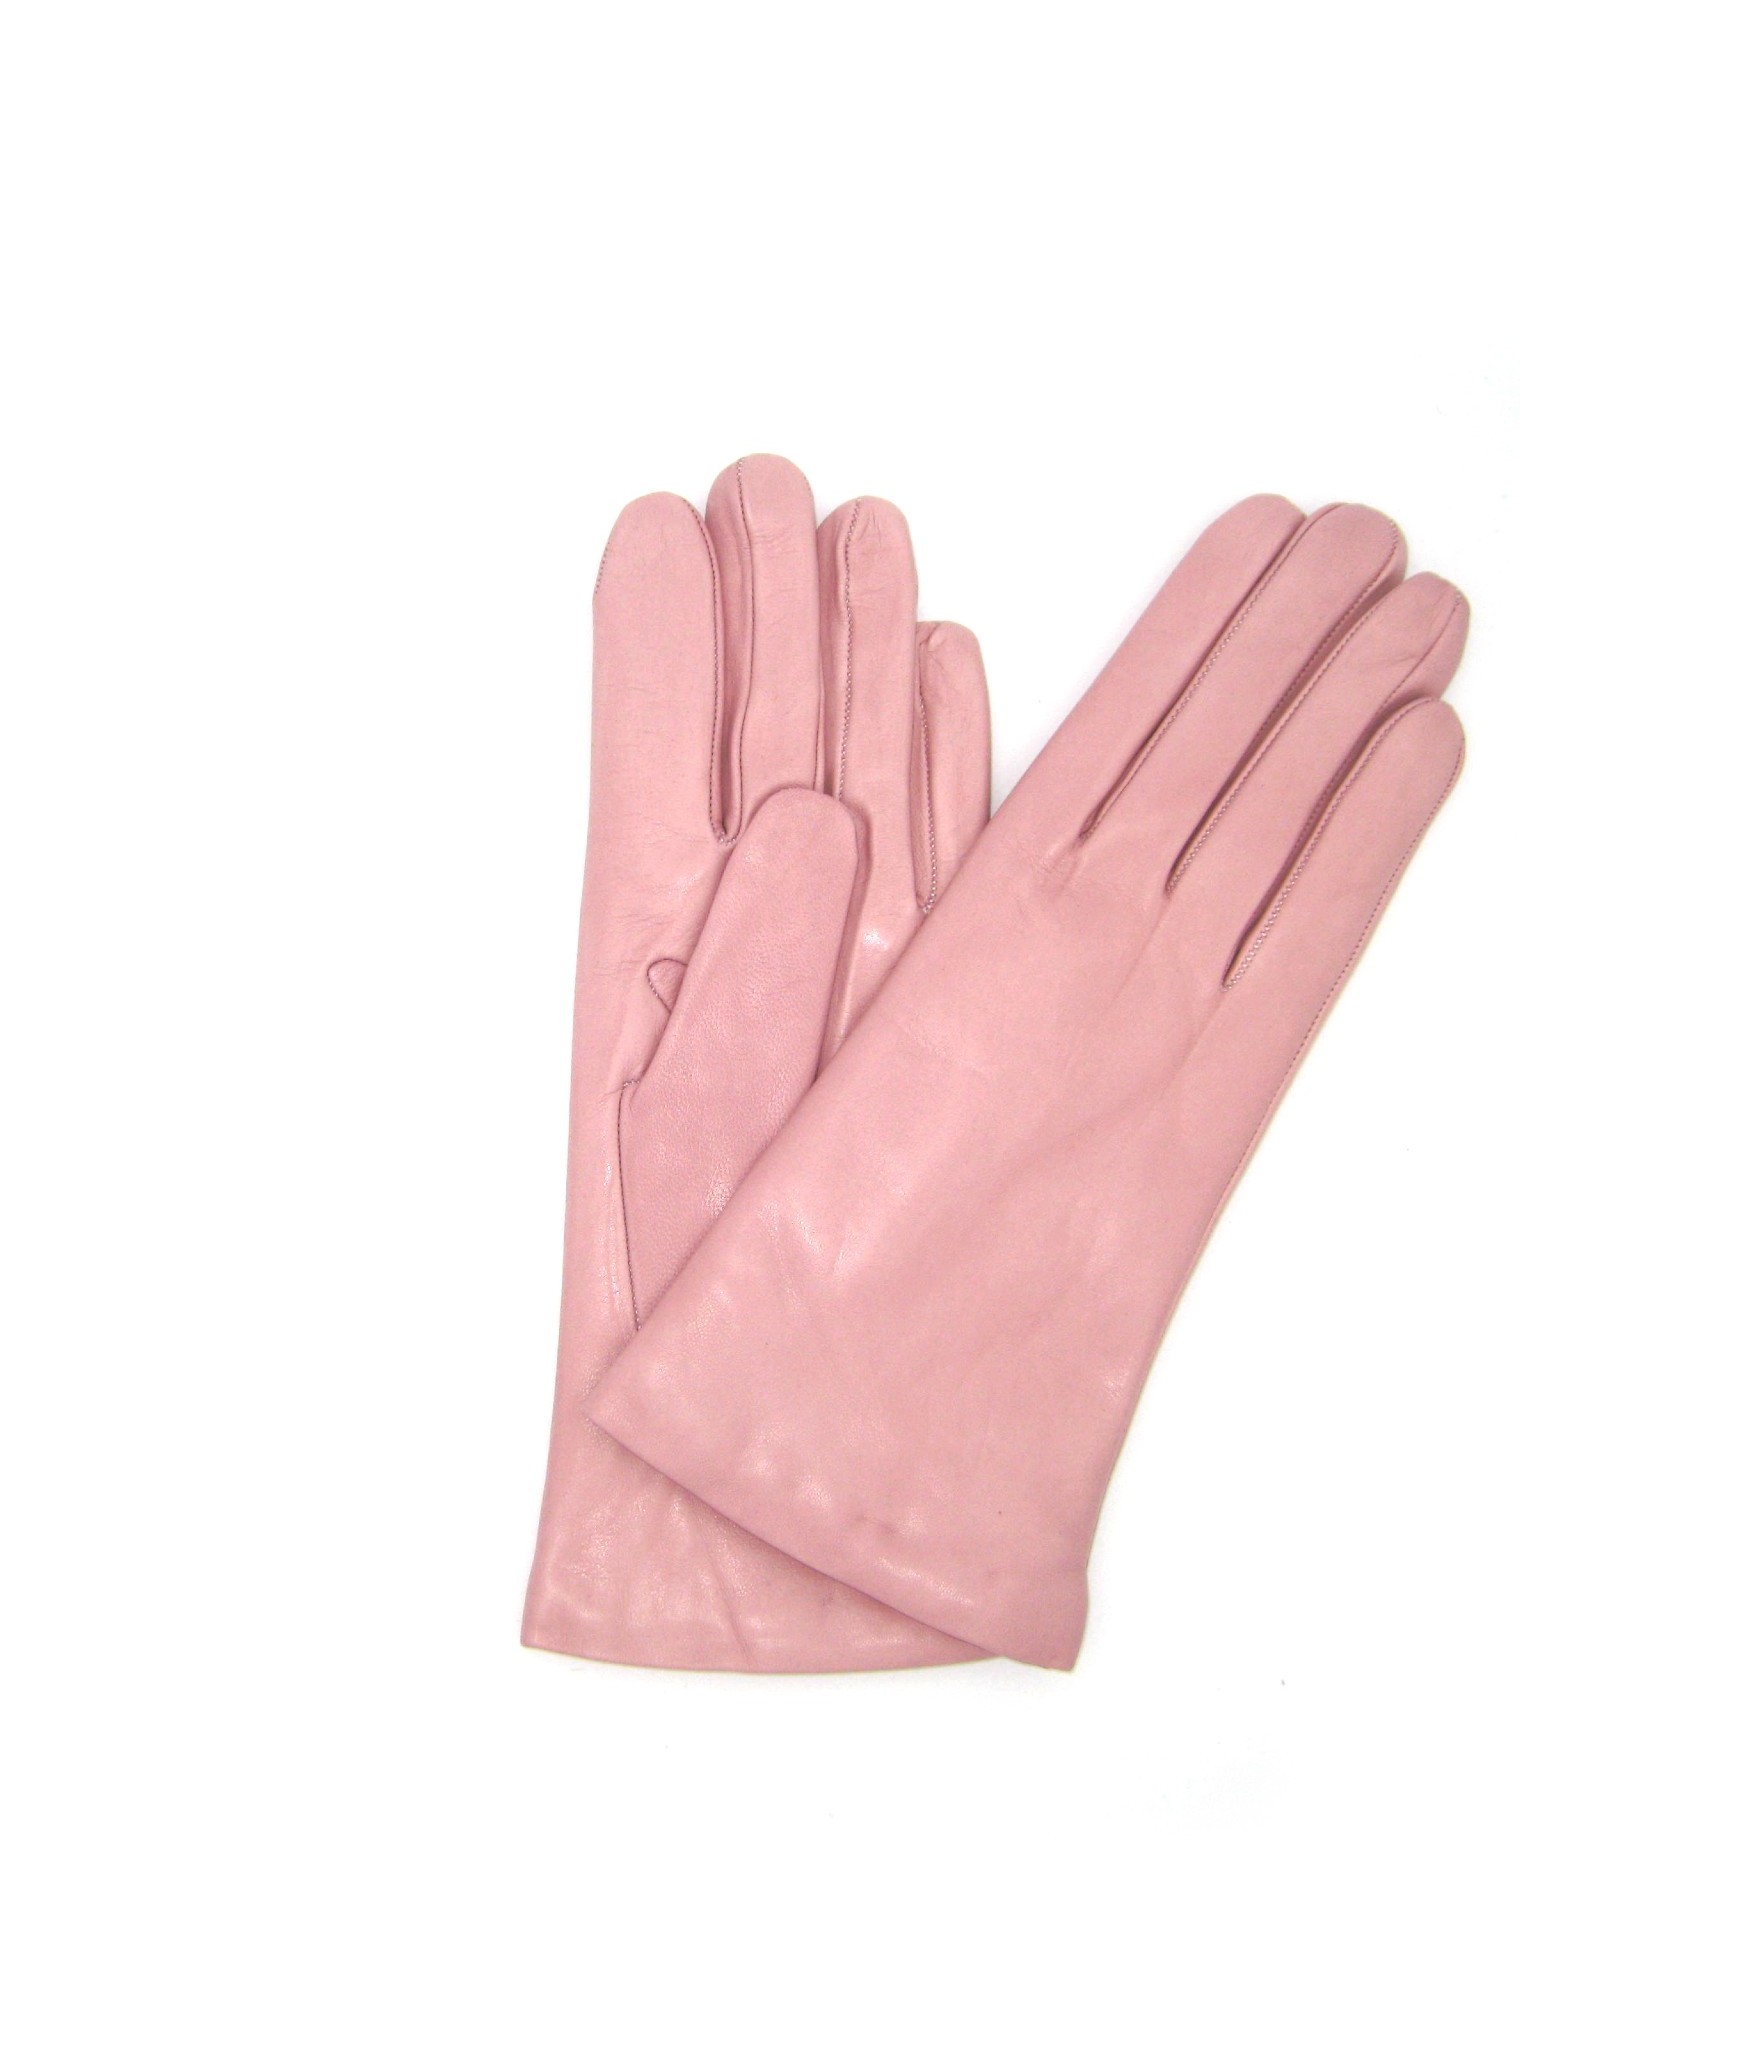 Nappa leather gloves  Cashmere lined   Nude